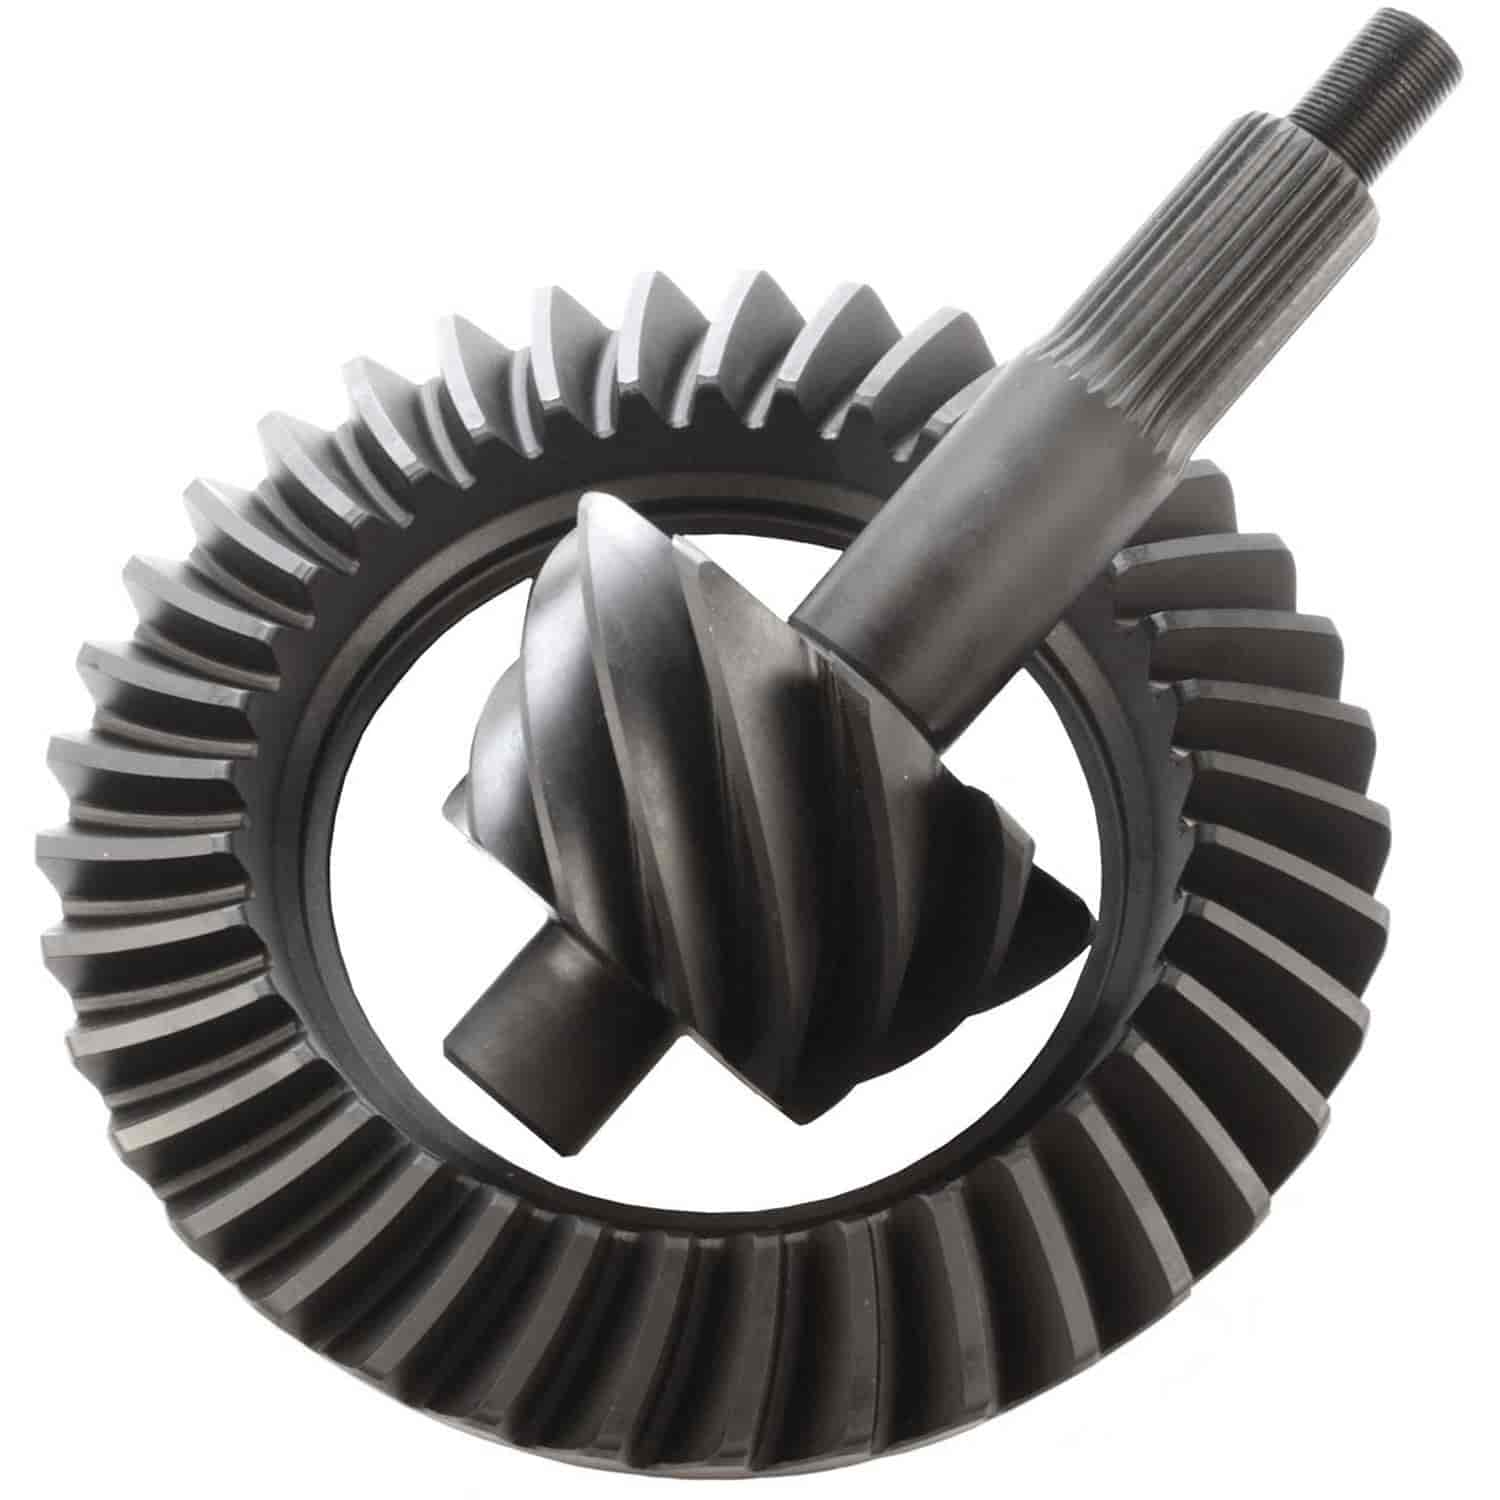 Excel Ring & Pinion Gear Set Ford 9" Ratio: 5.29